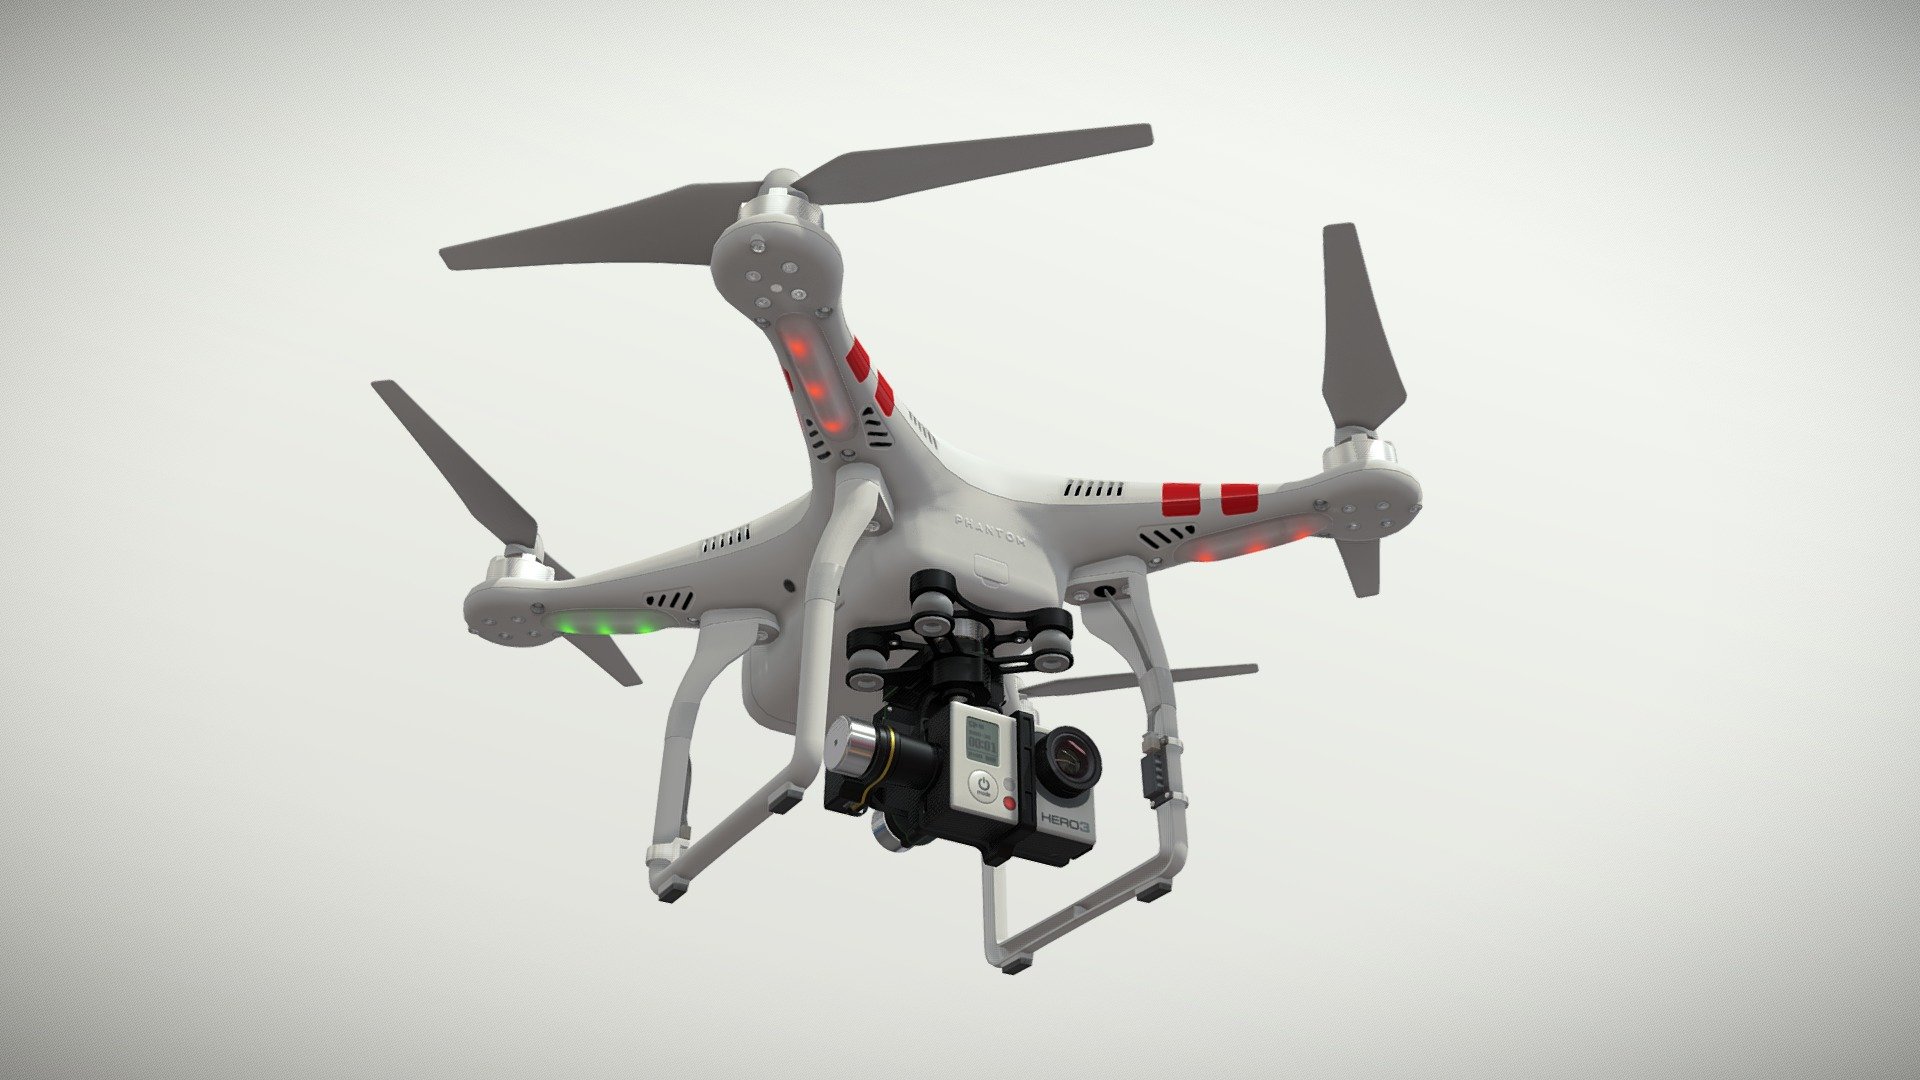 •   Let me present to you high-quality low-poly 3D model DJI Phantom 2 Quadcopter with Zenmuse H4-3D gimbal for GoPro Hero3-4 and GoPro HERO3 action camera. Modeling was made with ortho-photos of real quadcopter that is why all details of design are recreated most authentically.

•    Ease of use consists of a few meshes, it is low-polygonal and it has four materials.

•   The total of the main textures is 14. Resolution of all textures is from 2048 to 4096 pixels square aspect ratio in .png format. Also there is original texture file .PSD format in separate archive.

•   Polygon count of the model is – 24057.

•   The model has correct dimensions in real-world scale.

•   To use the model in other 3D programs there are scenes saved in formats .fbx, .obj, .DAE, .max (2010 version).

Note: If you see some artifacts on the textures, it means compression works in the Viewer. We recommend setting HD quality for textures. But anyway, original textures have no artifacts 3d model